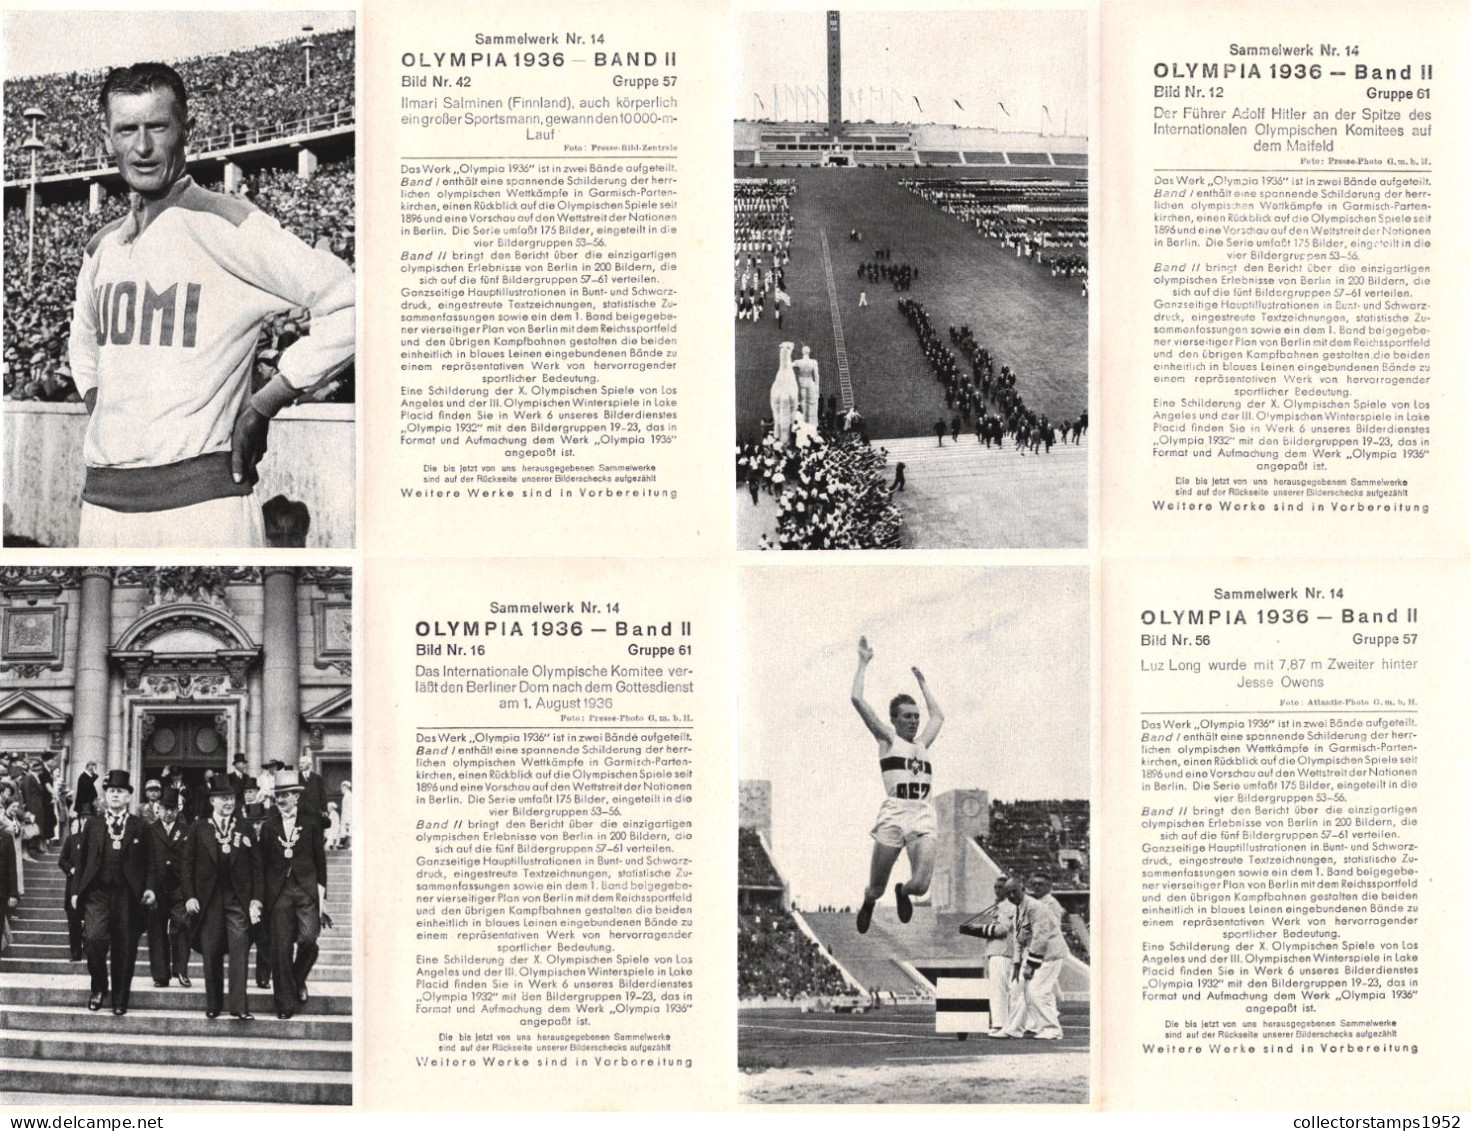 SPORTS, SET OF 71 PIECES, OLYMPIA 1936, BAND II, ED. VOL. 14., BERLIN, STADION, FLAG, BOAT, ARCHITECTURE, HORSE, GERMANY - Olympic Games